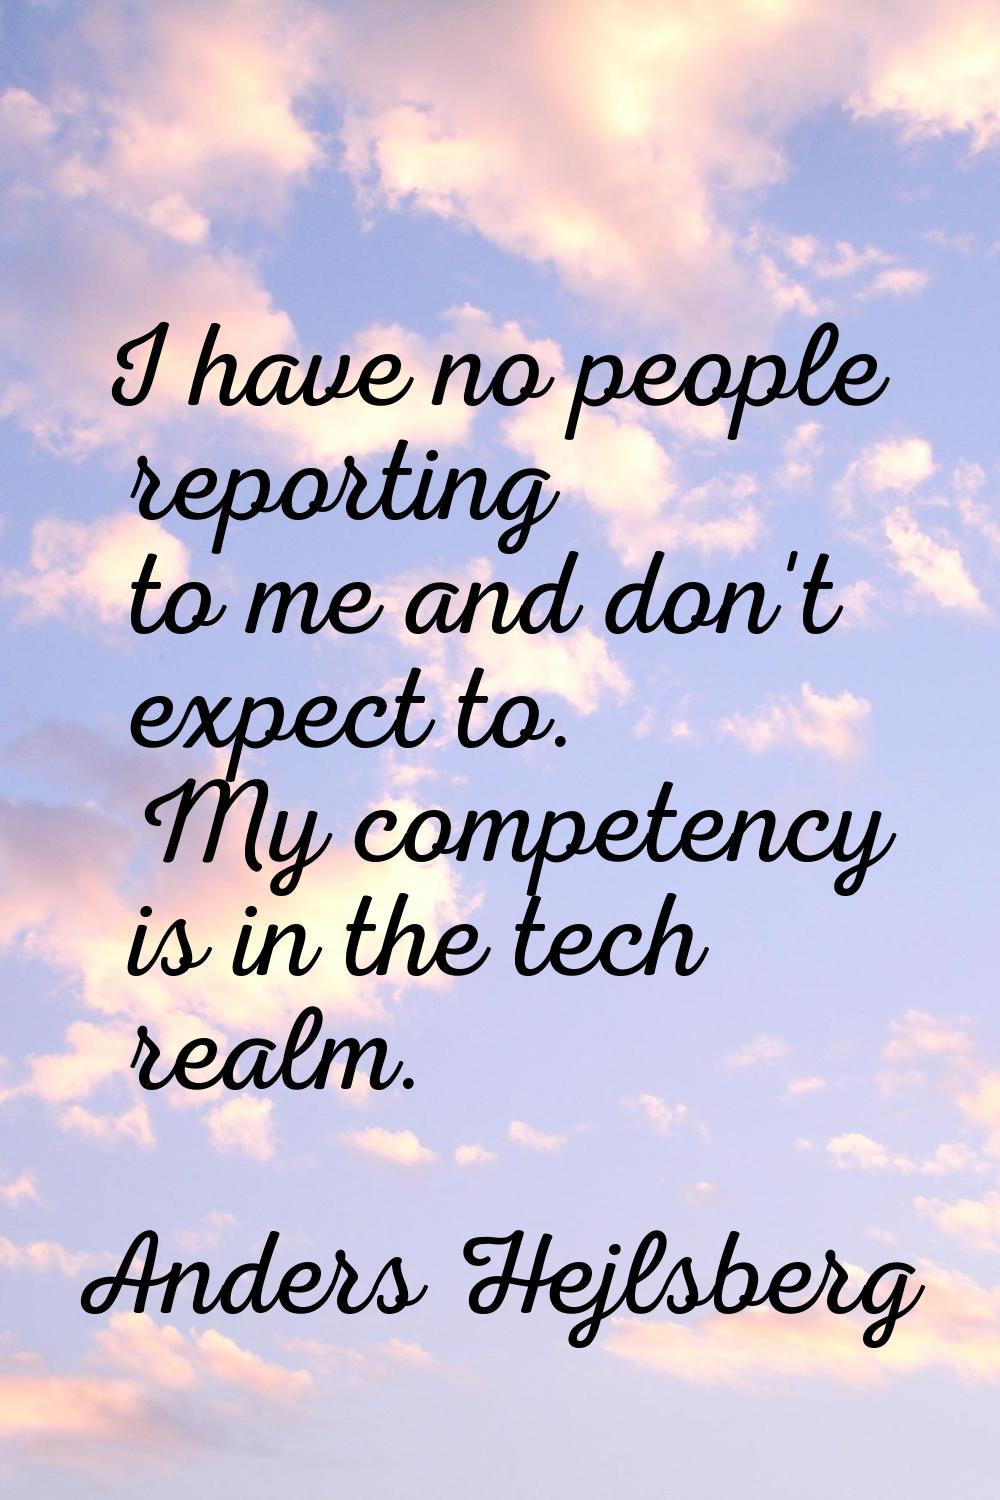 I have no people reporting to me and don't expect to. My competency is in the tech realm.